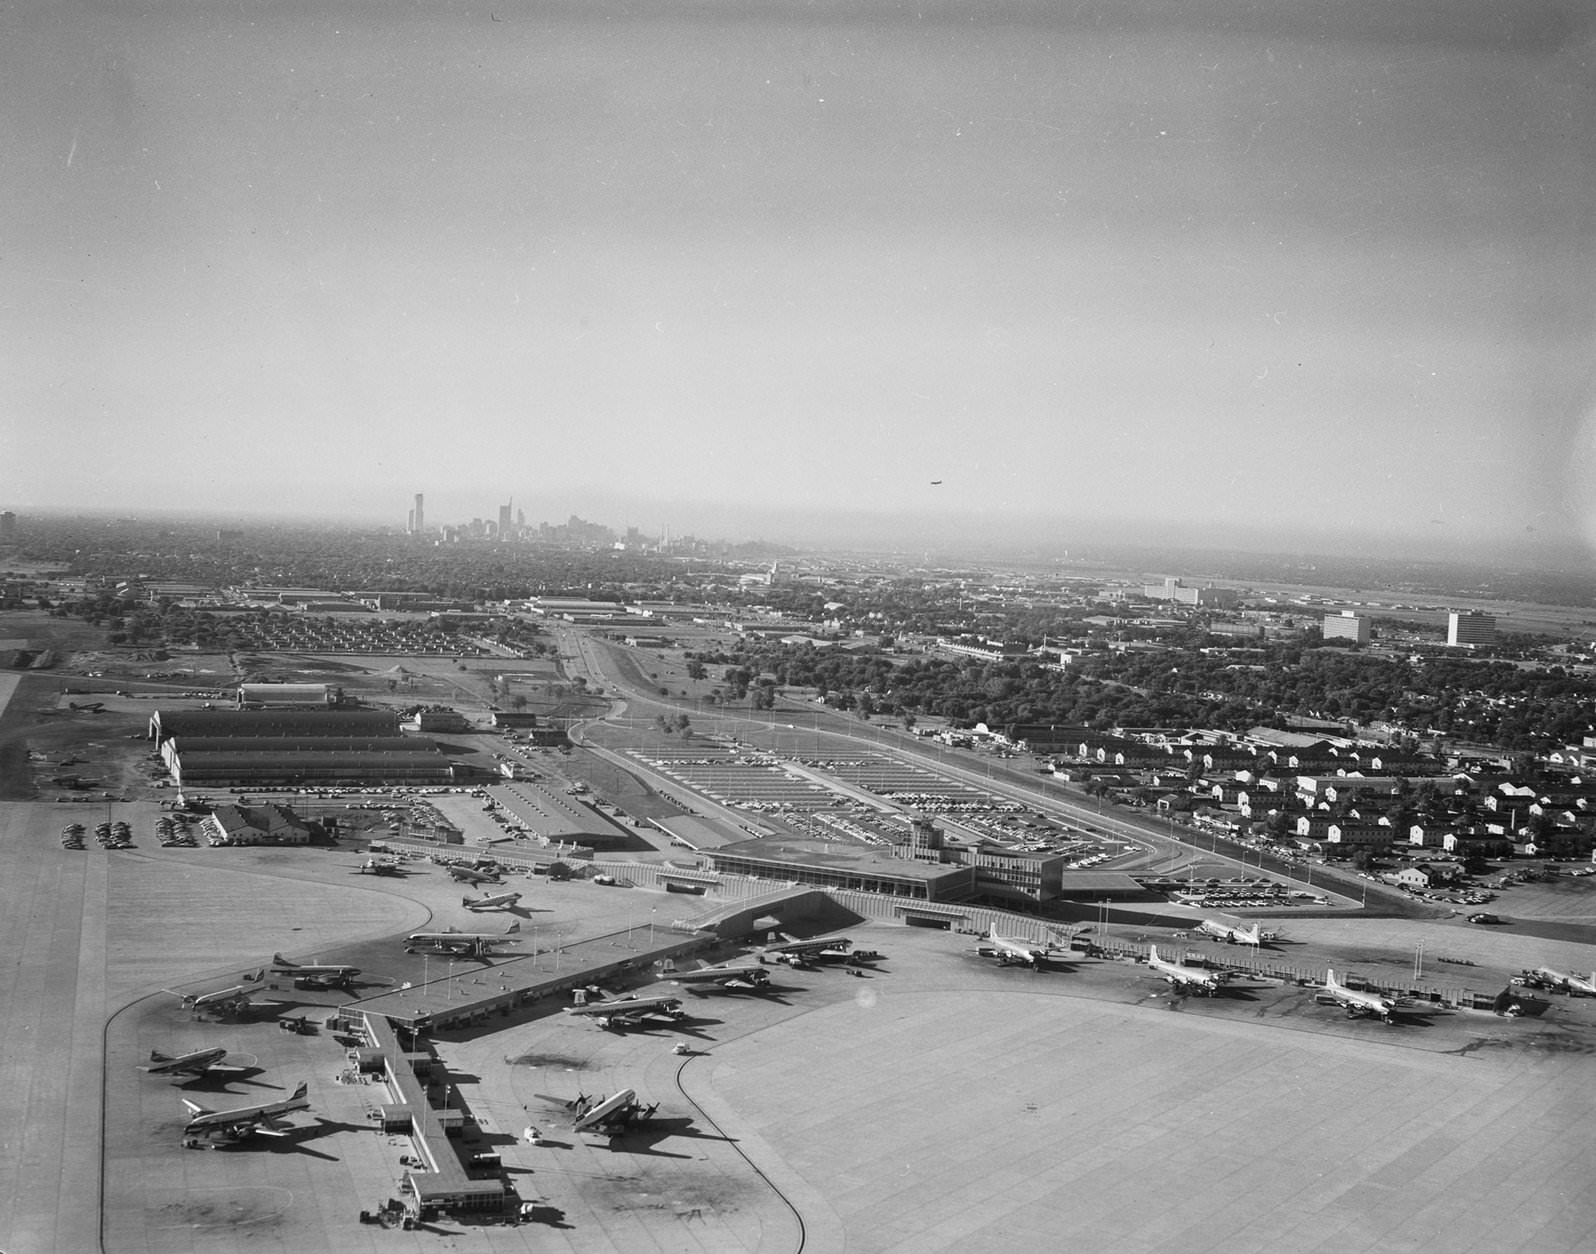 Dallas Love Field,1950. There are airplanes parked on the parking lot. There are a lot of buildings on the background.